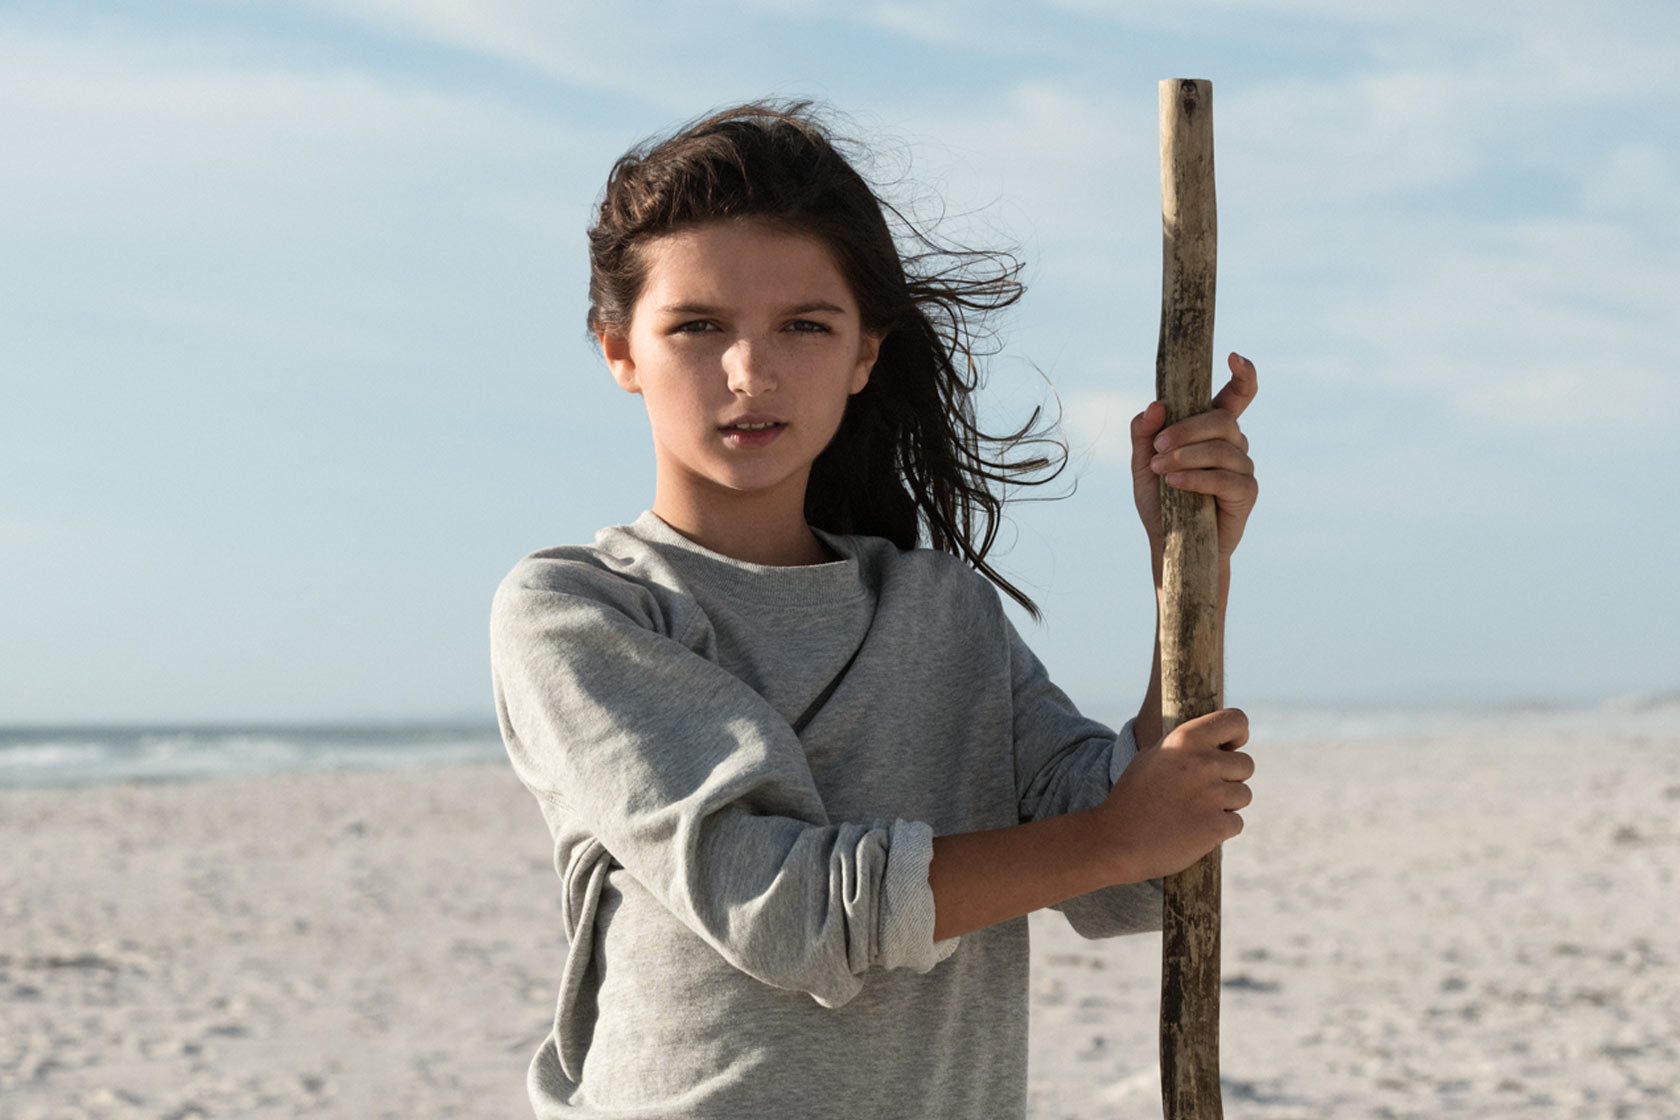 Girl standing on beach with stick in hand